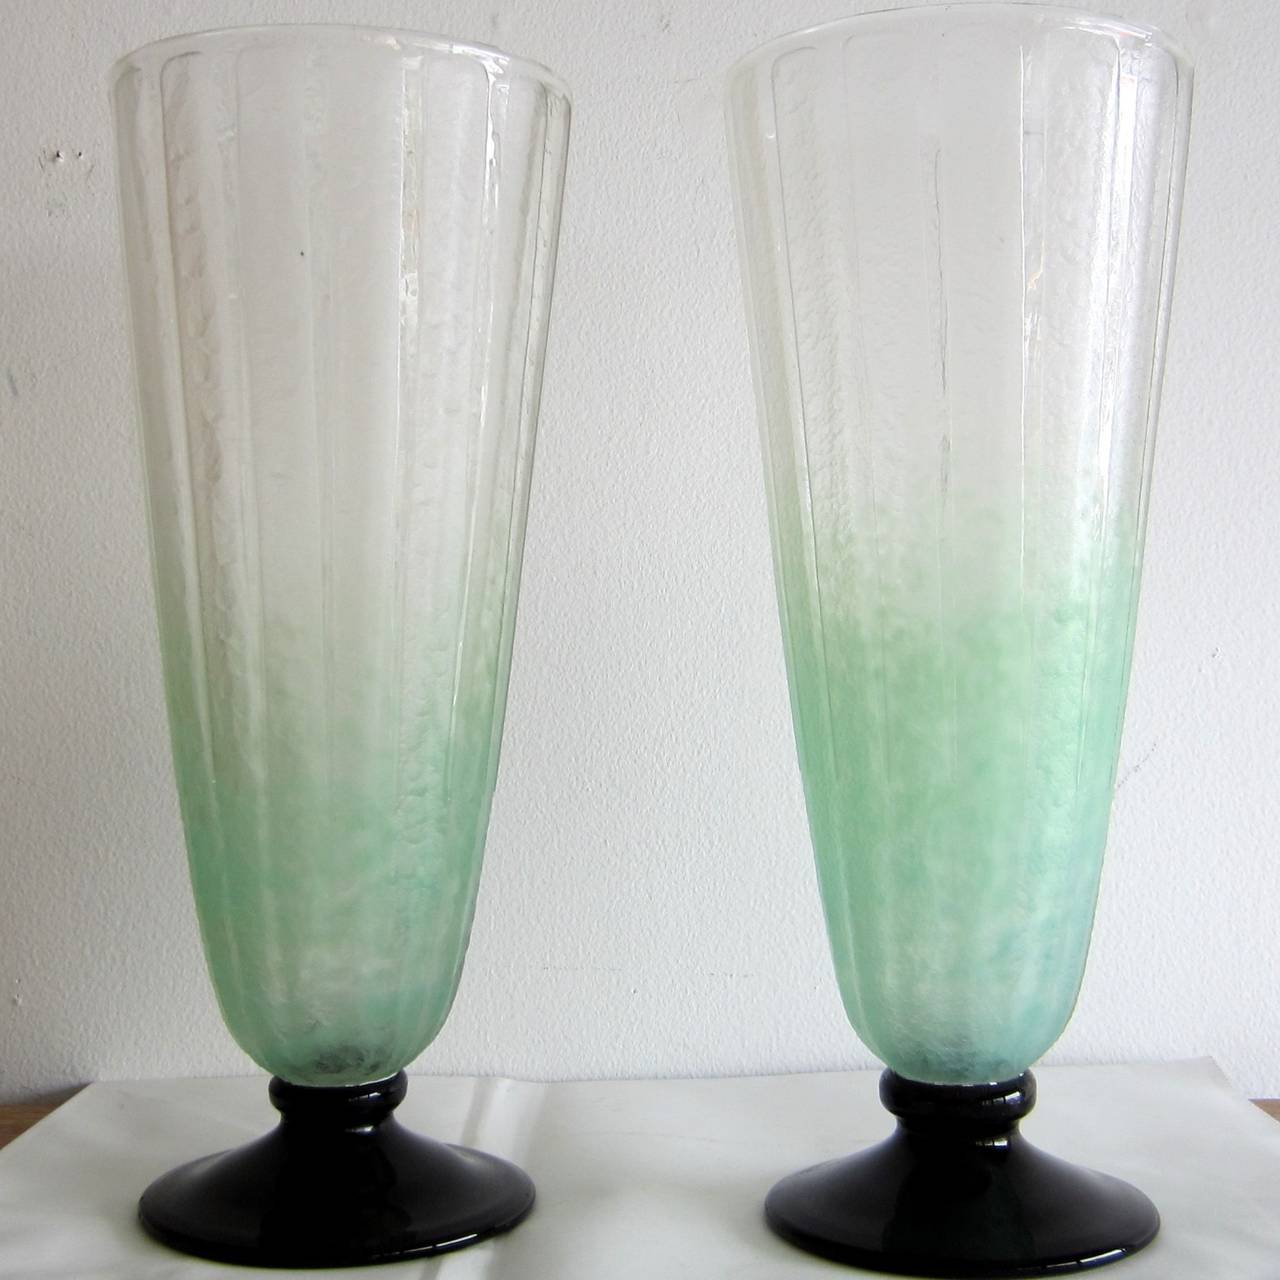 Art Deco Pair pale green frosted glass  vases signed by Charles Schneider.
Standing on a dark purple base, almond green and white top.
Elegant shape.